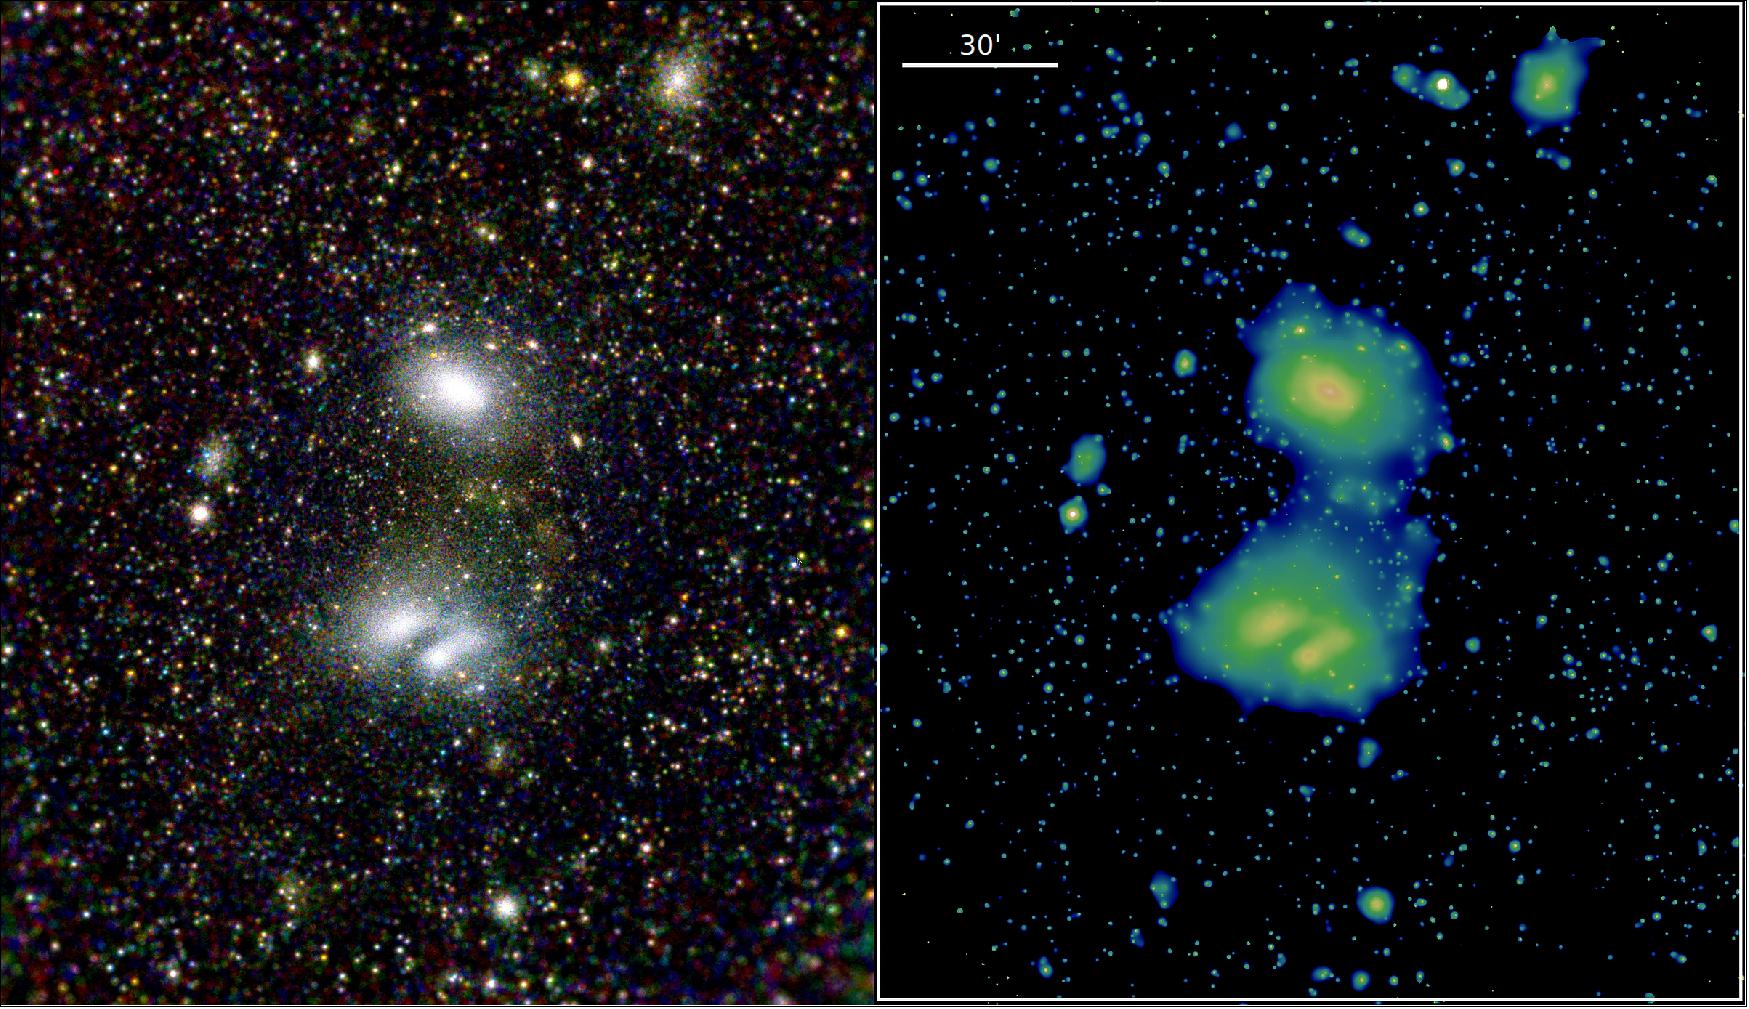 Figure 29: These two eROSITA images show the two interacting galaxy clusters A3391, to the top of the image, and the double-peaked cluster A3395, to the bottom, highlighting eROSITA’s superb view of the distant Universe. They were observed in a series of exposures with all seven eROSITA telescope modules taken from 17 to 18 October 2019. The individual images were subjected to different analysis techniques, and then colored in different schemes to highlight the different structures. In the left-hand image, the red, green and blue colors refer to the three different energy bands of eROSITA. One clearly sees the two clusters as nebulous structures, which shine brightly in X-rays due to the presence of extremely hot gas (tens of millions of degrees) in the space between galaxies. The image on the right highlights the “bridge” or “filament” between the two clusters, confirming the suspicion that these two huge structures do interact dynamically. The eROSITA observations also show hundreds of point-like sources, signposting either distant supermassive black holes or hot stars in the Milky Way [image credit: T. Reiprich (Univ. Bonn), M. Ramos-Ceja (MPE), F. Pacaud (Univ. Bonn), D. Eckert (Univ. Geneva), J. Sanders (MPE), N. Ota (Univ. Bonn), E. Bulbul (MPE), V. Ghirardini (MPE), MPE/IKI]